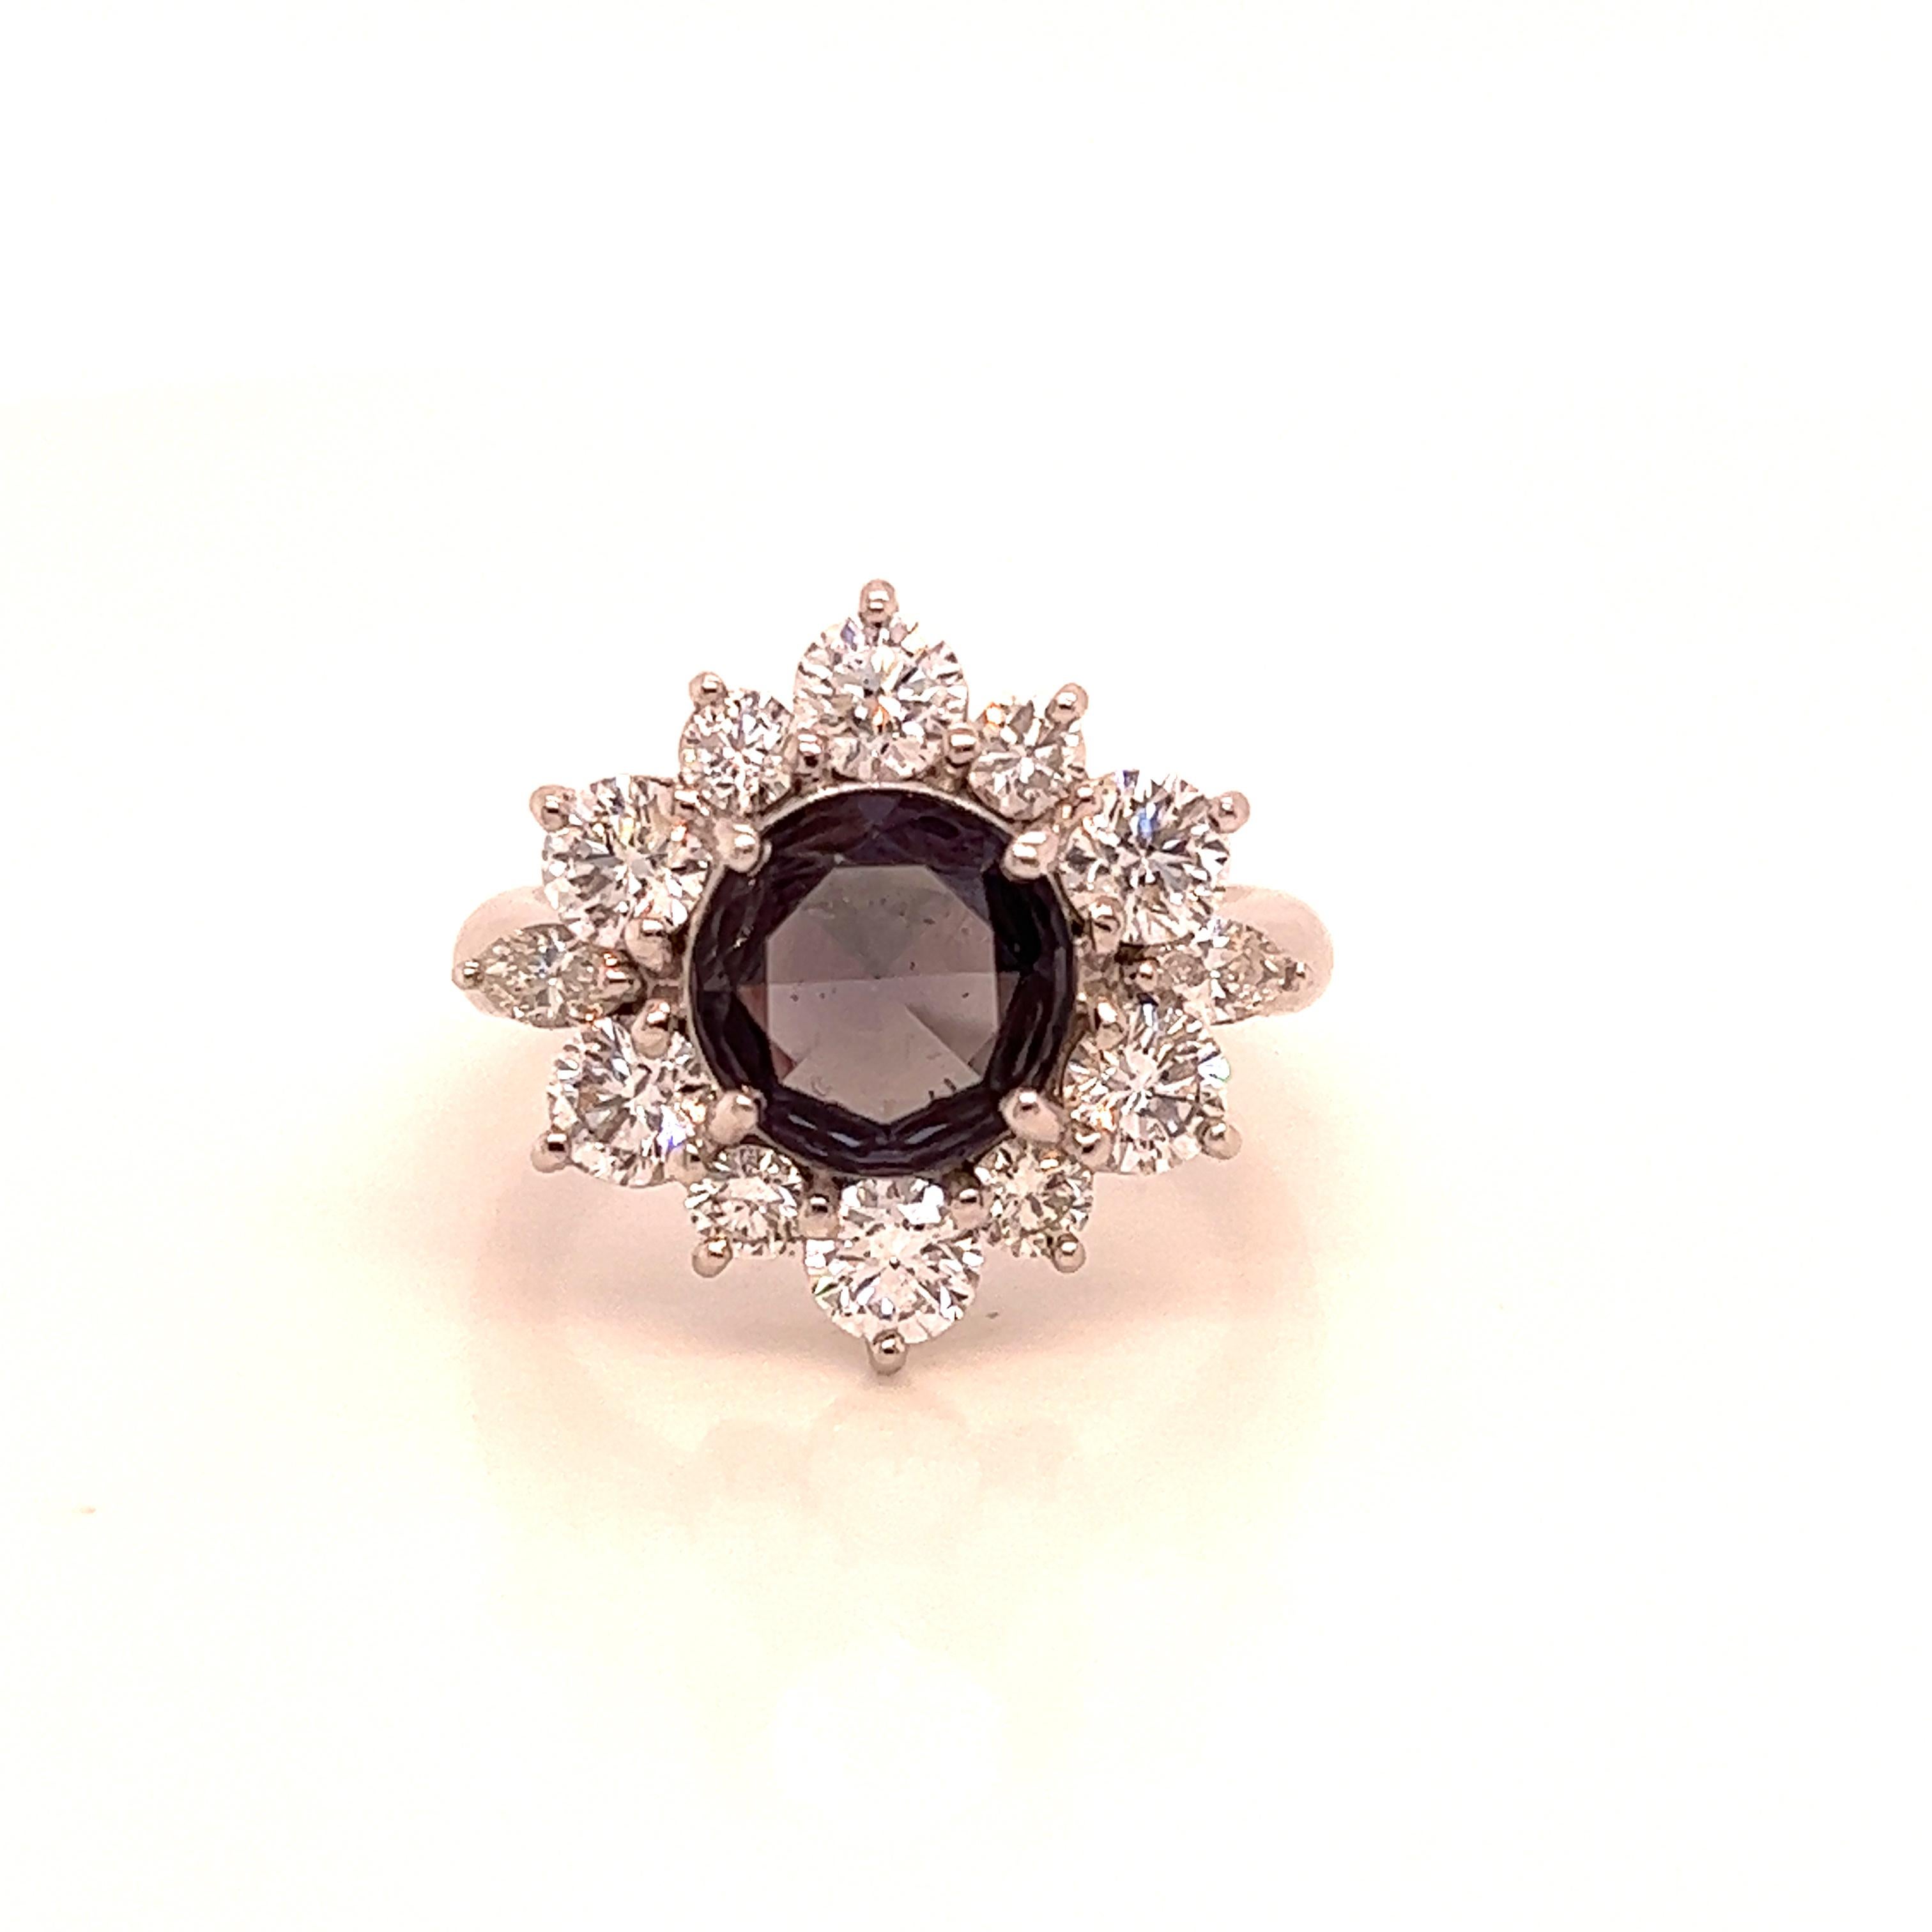 This is a gorgeous natural AAA quality round Alexandrite surrounded by dainty diamonds that is set in a vintage platinum setting. This ring features a natural 1.78 carat round alexandrite that is certified by the Gemological Institute of America